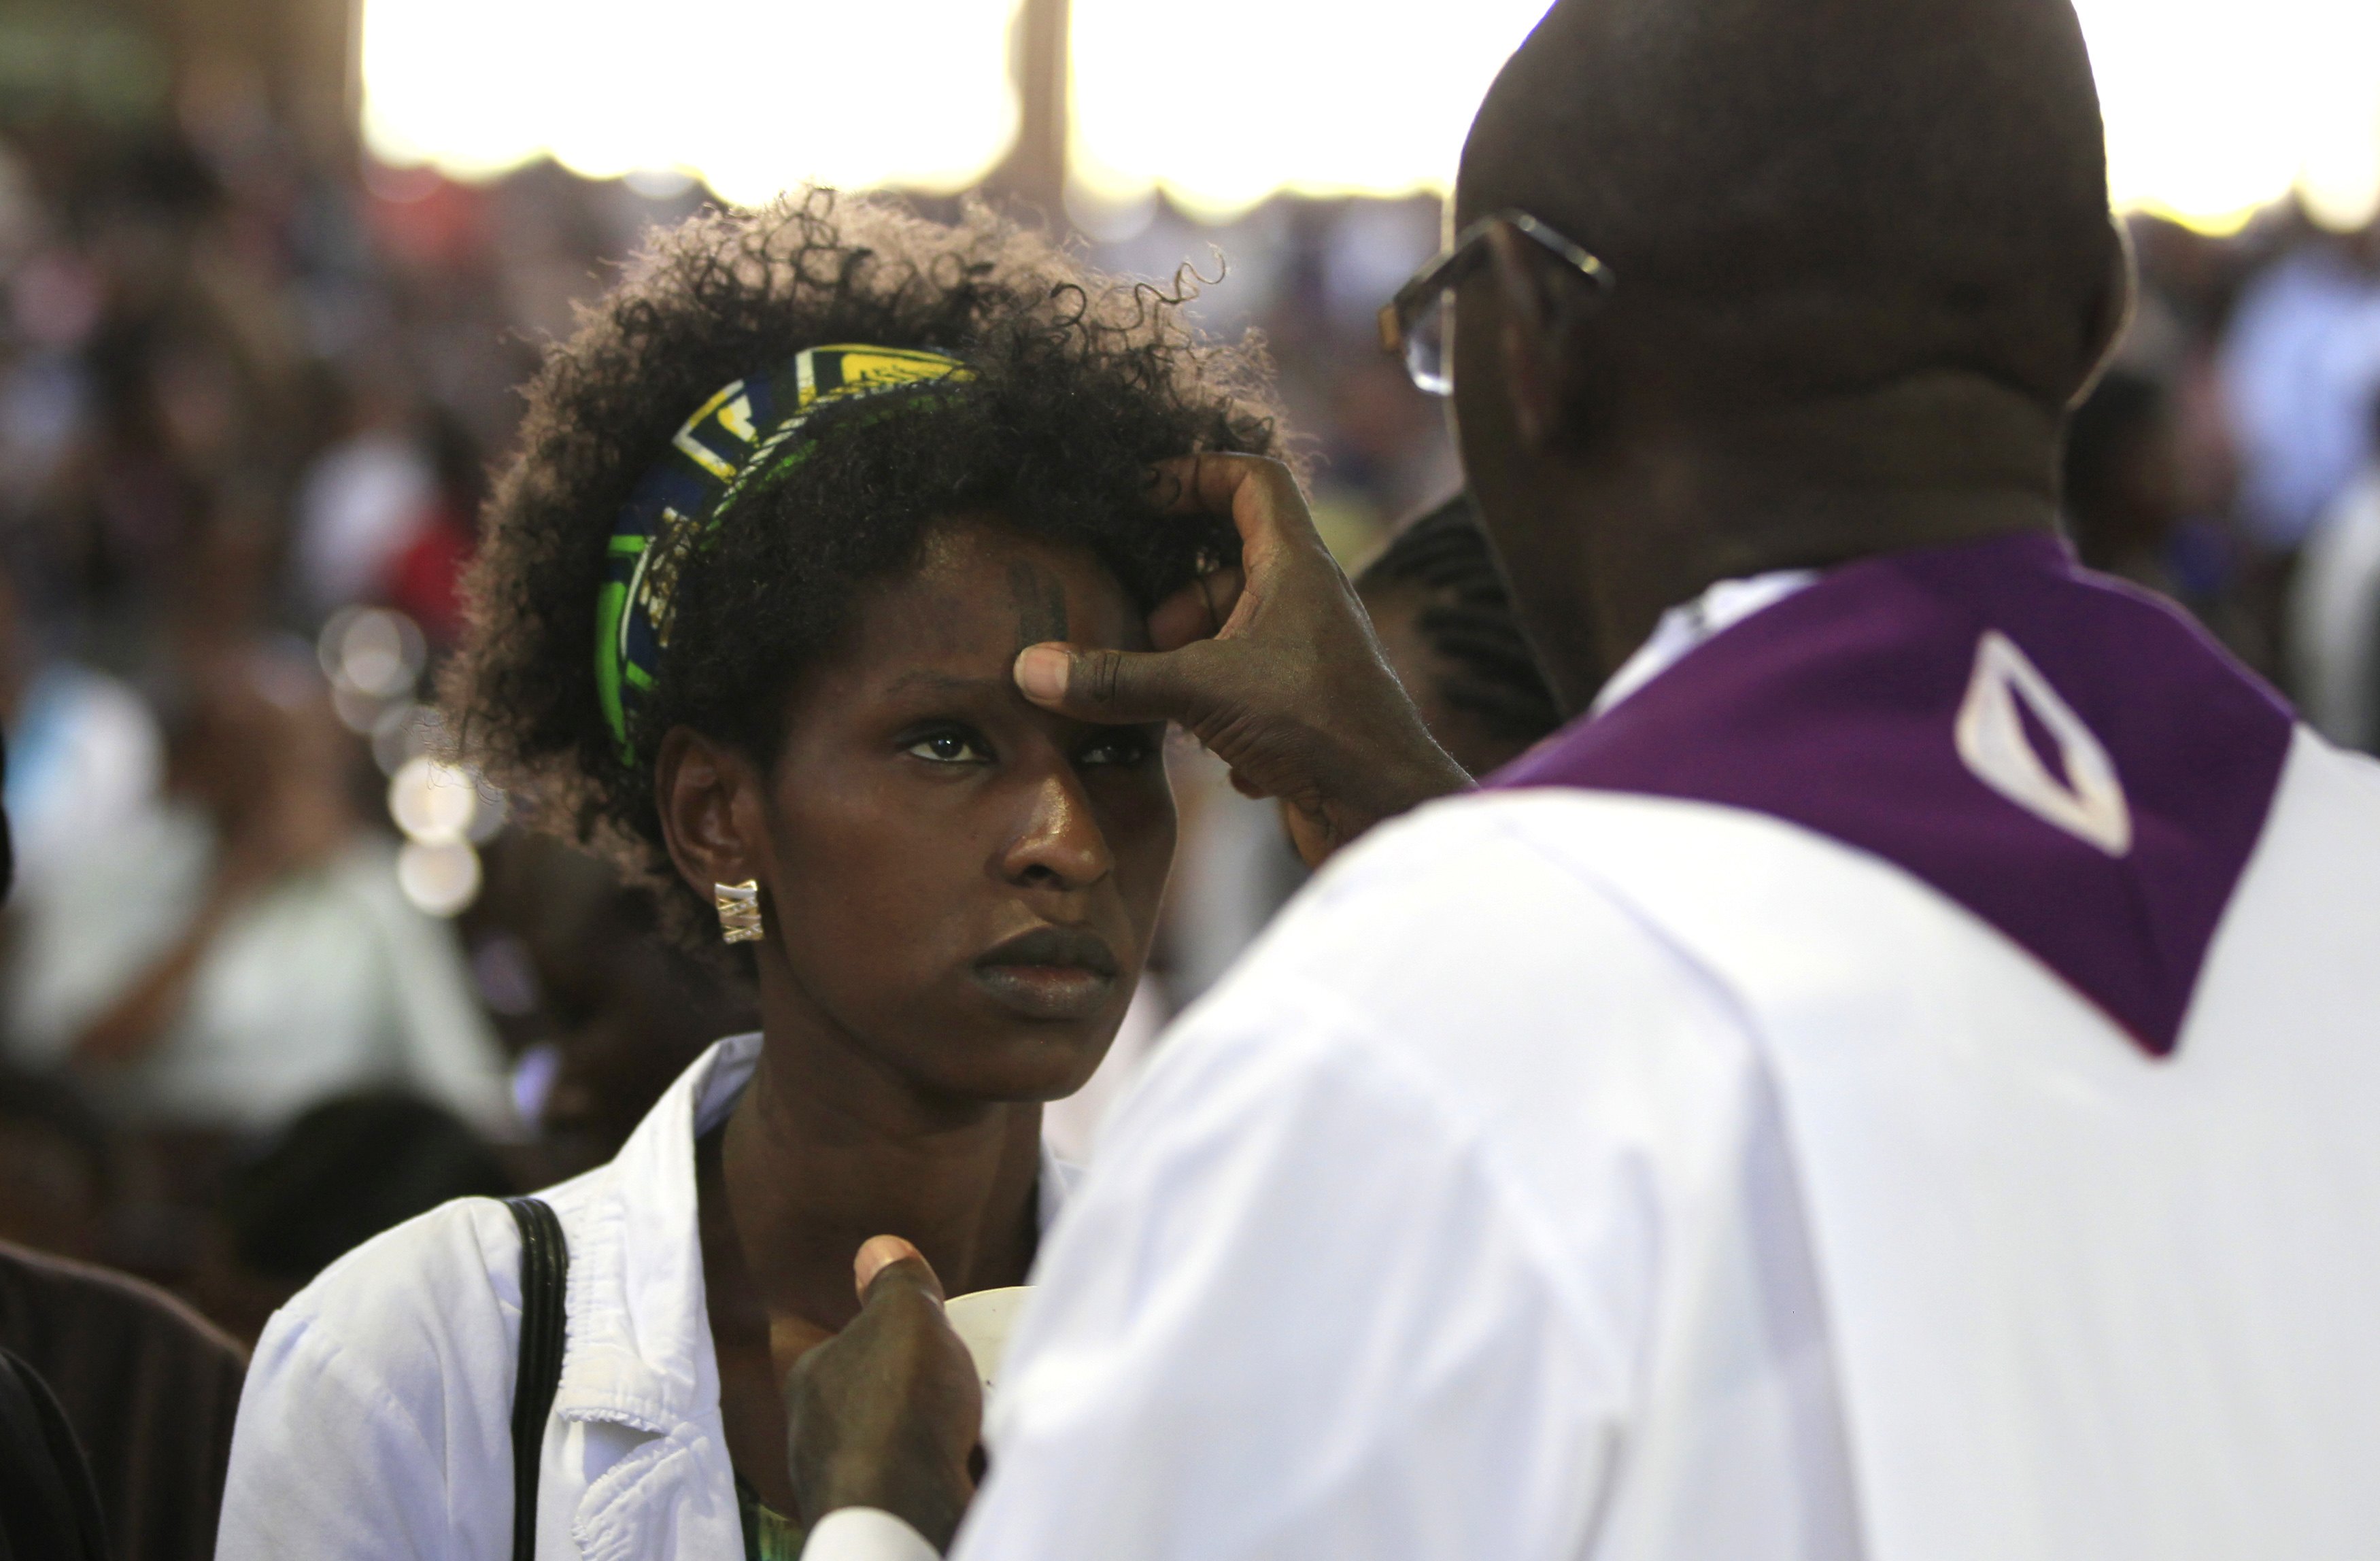 A Roman Catholic priest use ash to mark a cross on the forehead of a faithful during the Ash Wednesday mass at the holy Family minor basilica parish in Kenya's capital Nairobi, February 13, 2013. Catholics round the world celebrated Ash Wednesday, which serves as a reminder that "as a man is dust, so unto dust he shall return" and marks the beginning of the season of Lent. REUTERS/Thomas Mukoya (KENYA - Tags: SOCIETY RELIGION ANNIVERSARY)